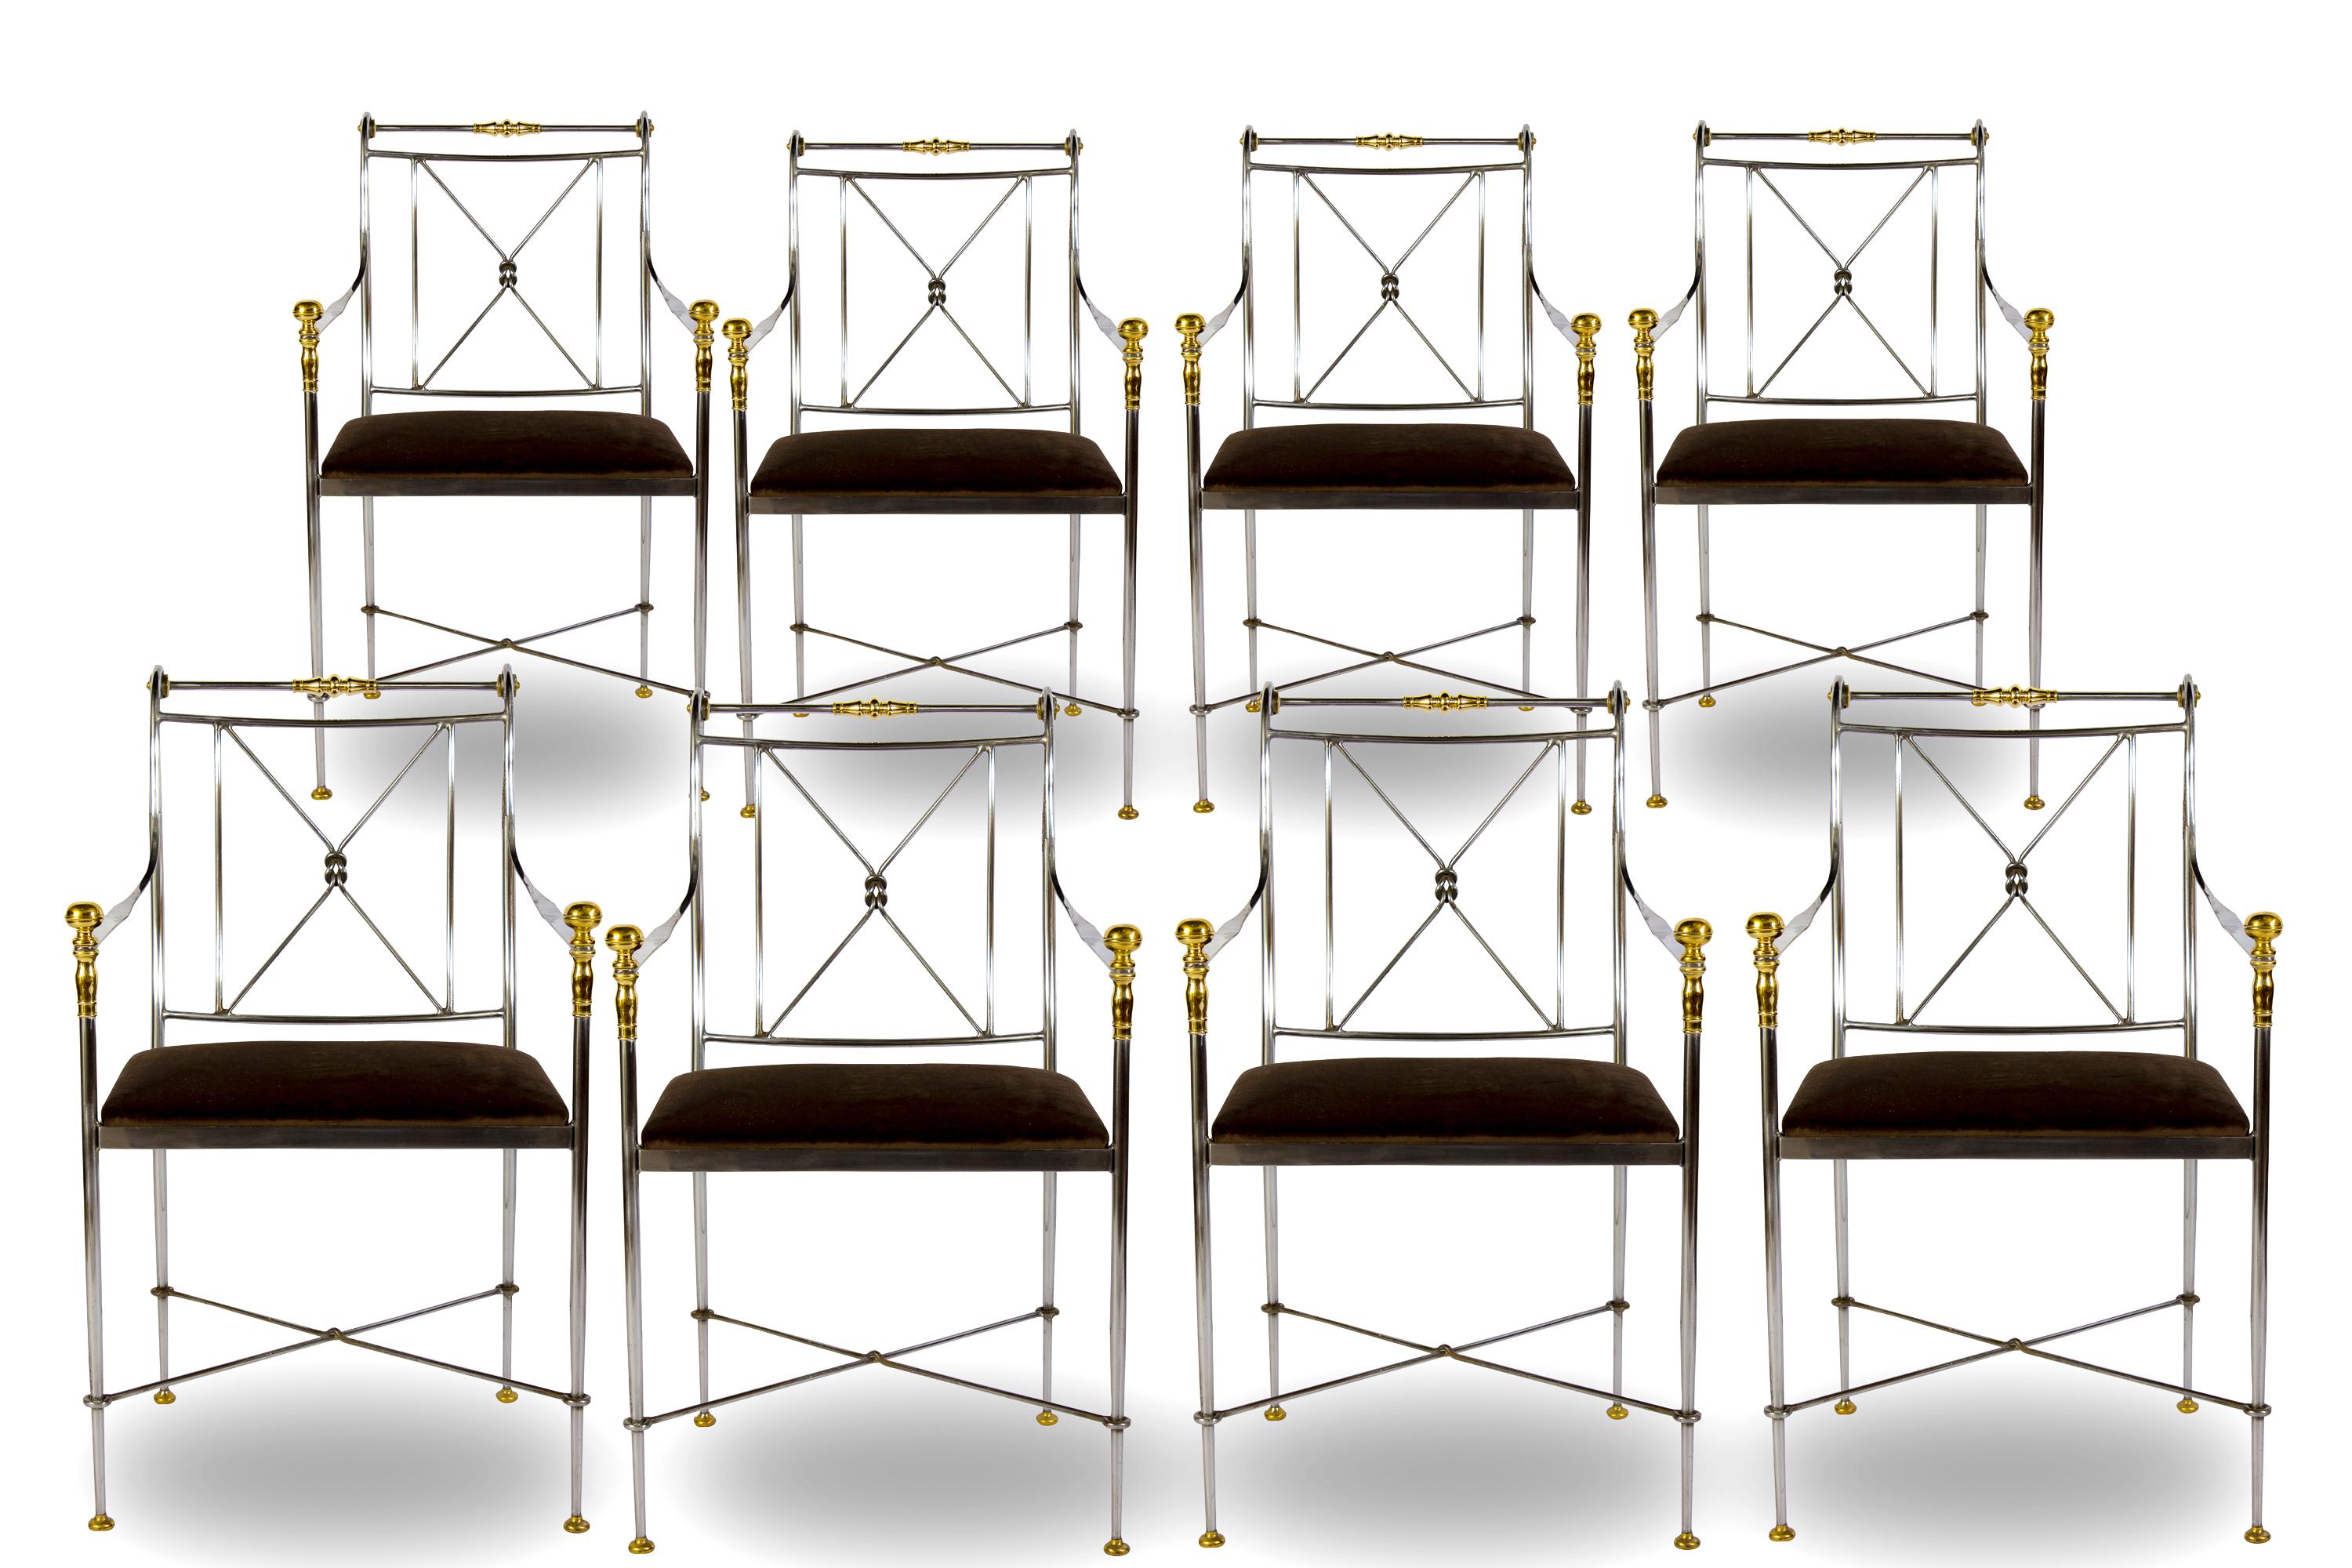 A pair of Italian steel and brass armchairs with dark velvet seats.
Made in Italy and featuring polished steel, solid cast brass made by Orlandi . 
Each chair has been masterfully welded, crafted, absolutely wonderful proportions and is